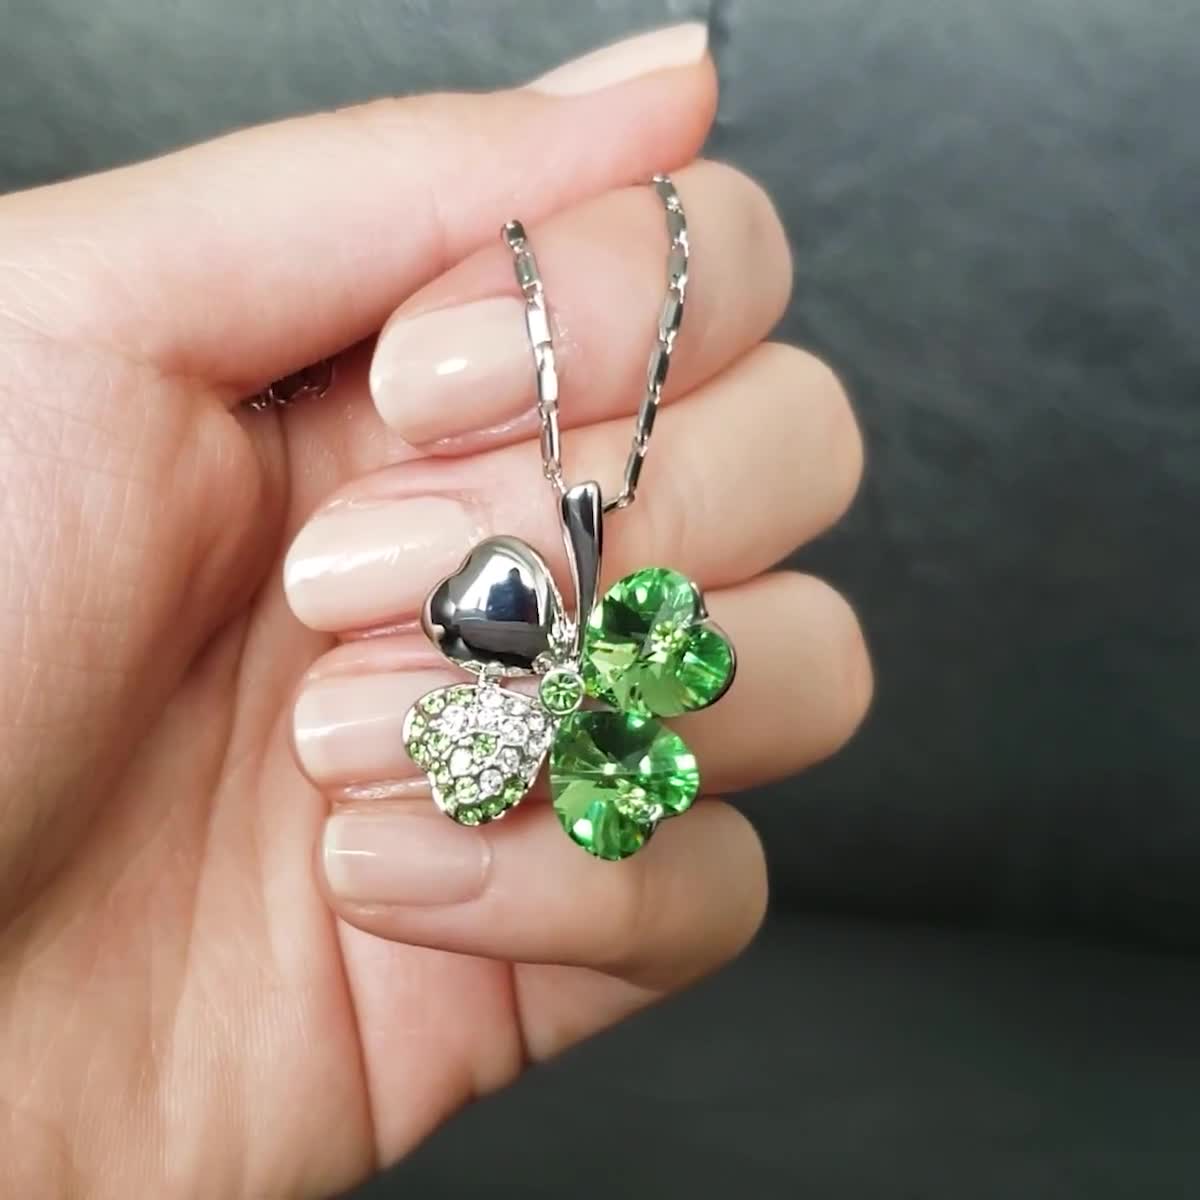 Green Four Leaf Clover Necklace, Swarovski Crystals, Womens Silver Necklace,  St. Patrick's Day Jewelry, Good Luck Pendant, Jewelry Gift 